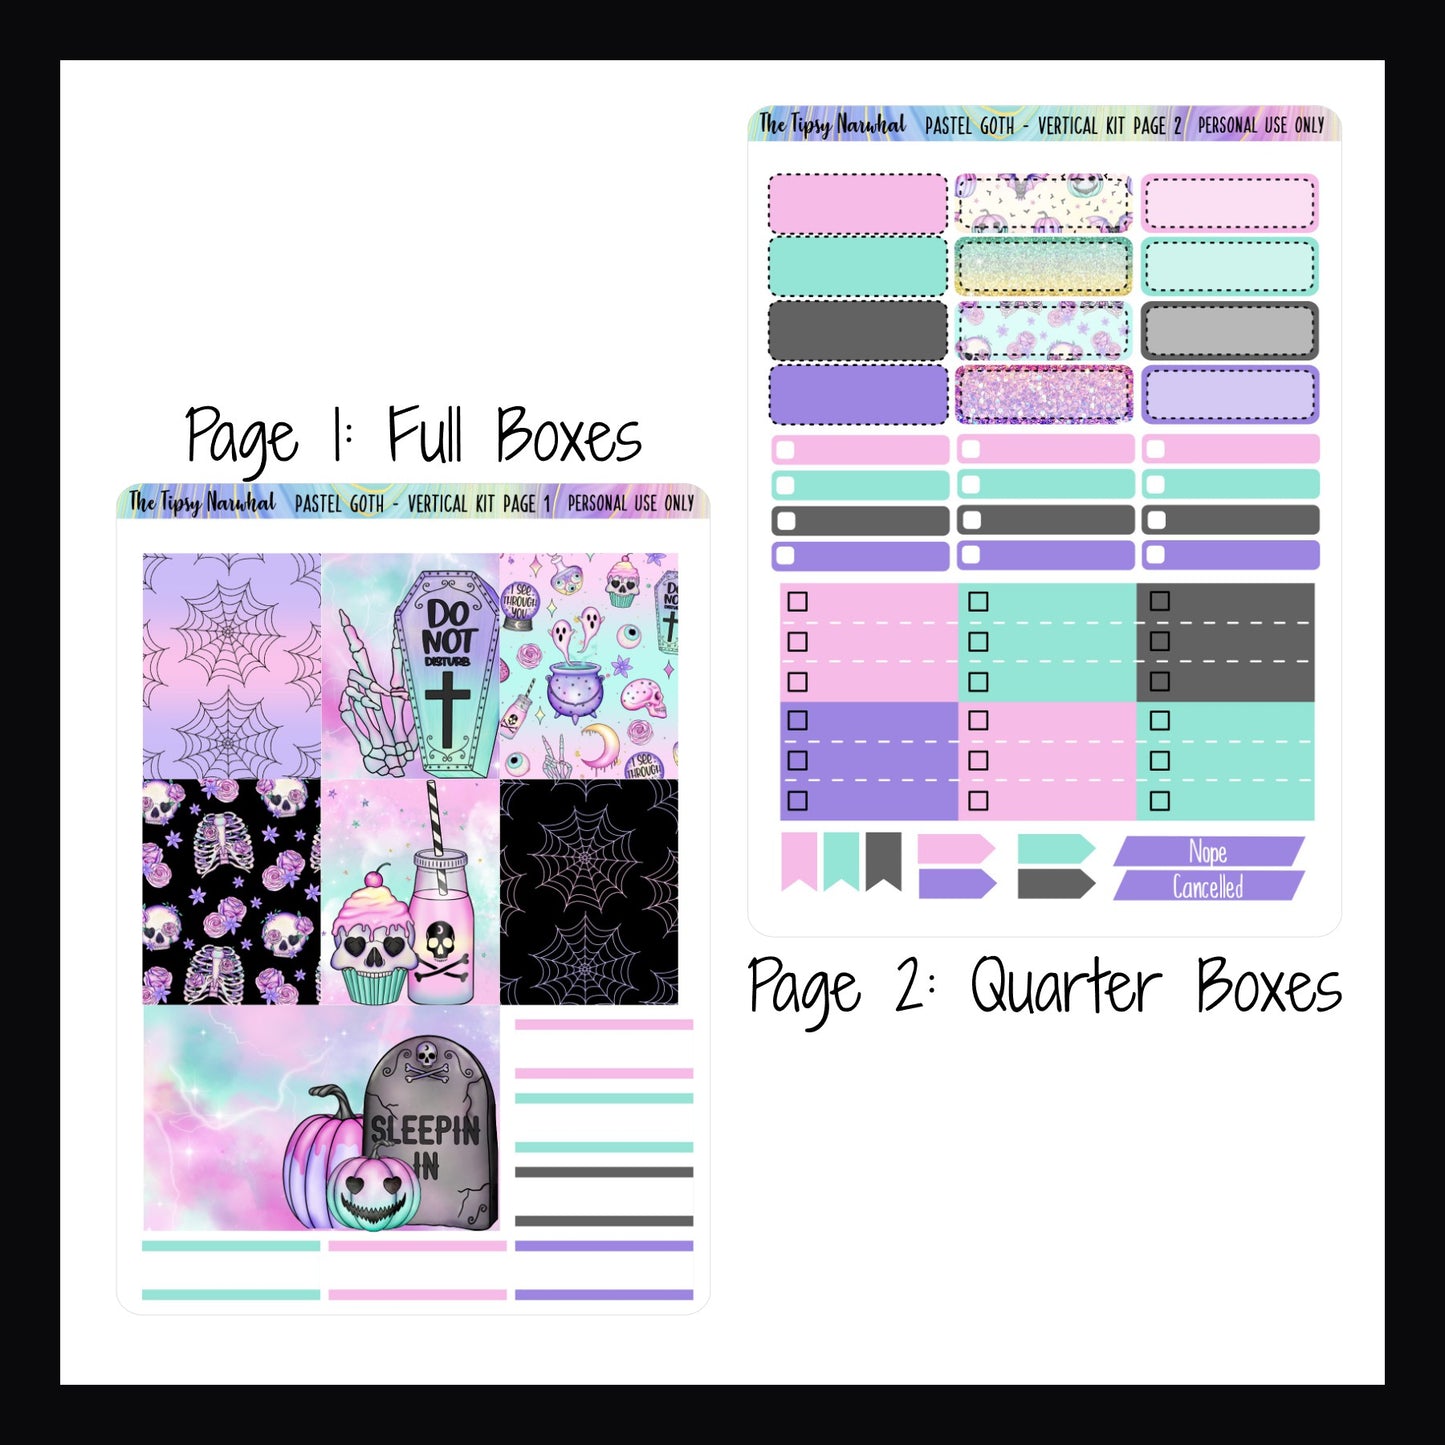 Digital Pastel Goth Vertical Kit pages 1 and 2.  Page 1 features full box deco stickers and some quarter box stickers.  Page 2 features additional quarter boxes, skinny check boxes, cancellation bars, flags, and top 3 priority check list boxes.